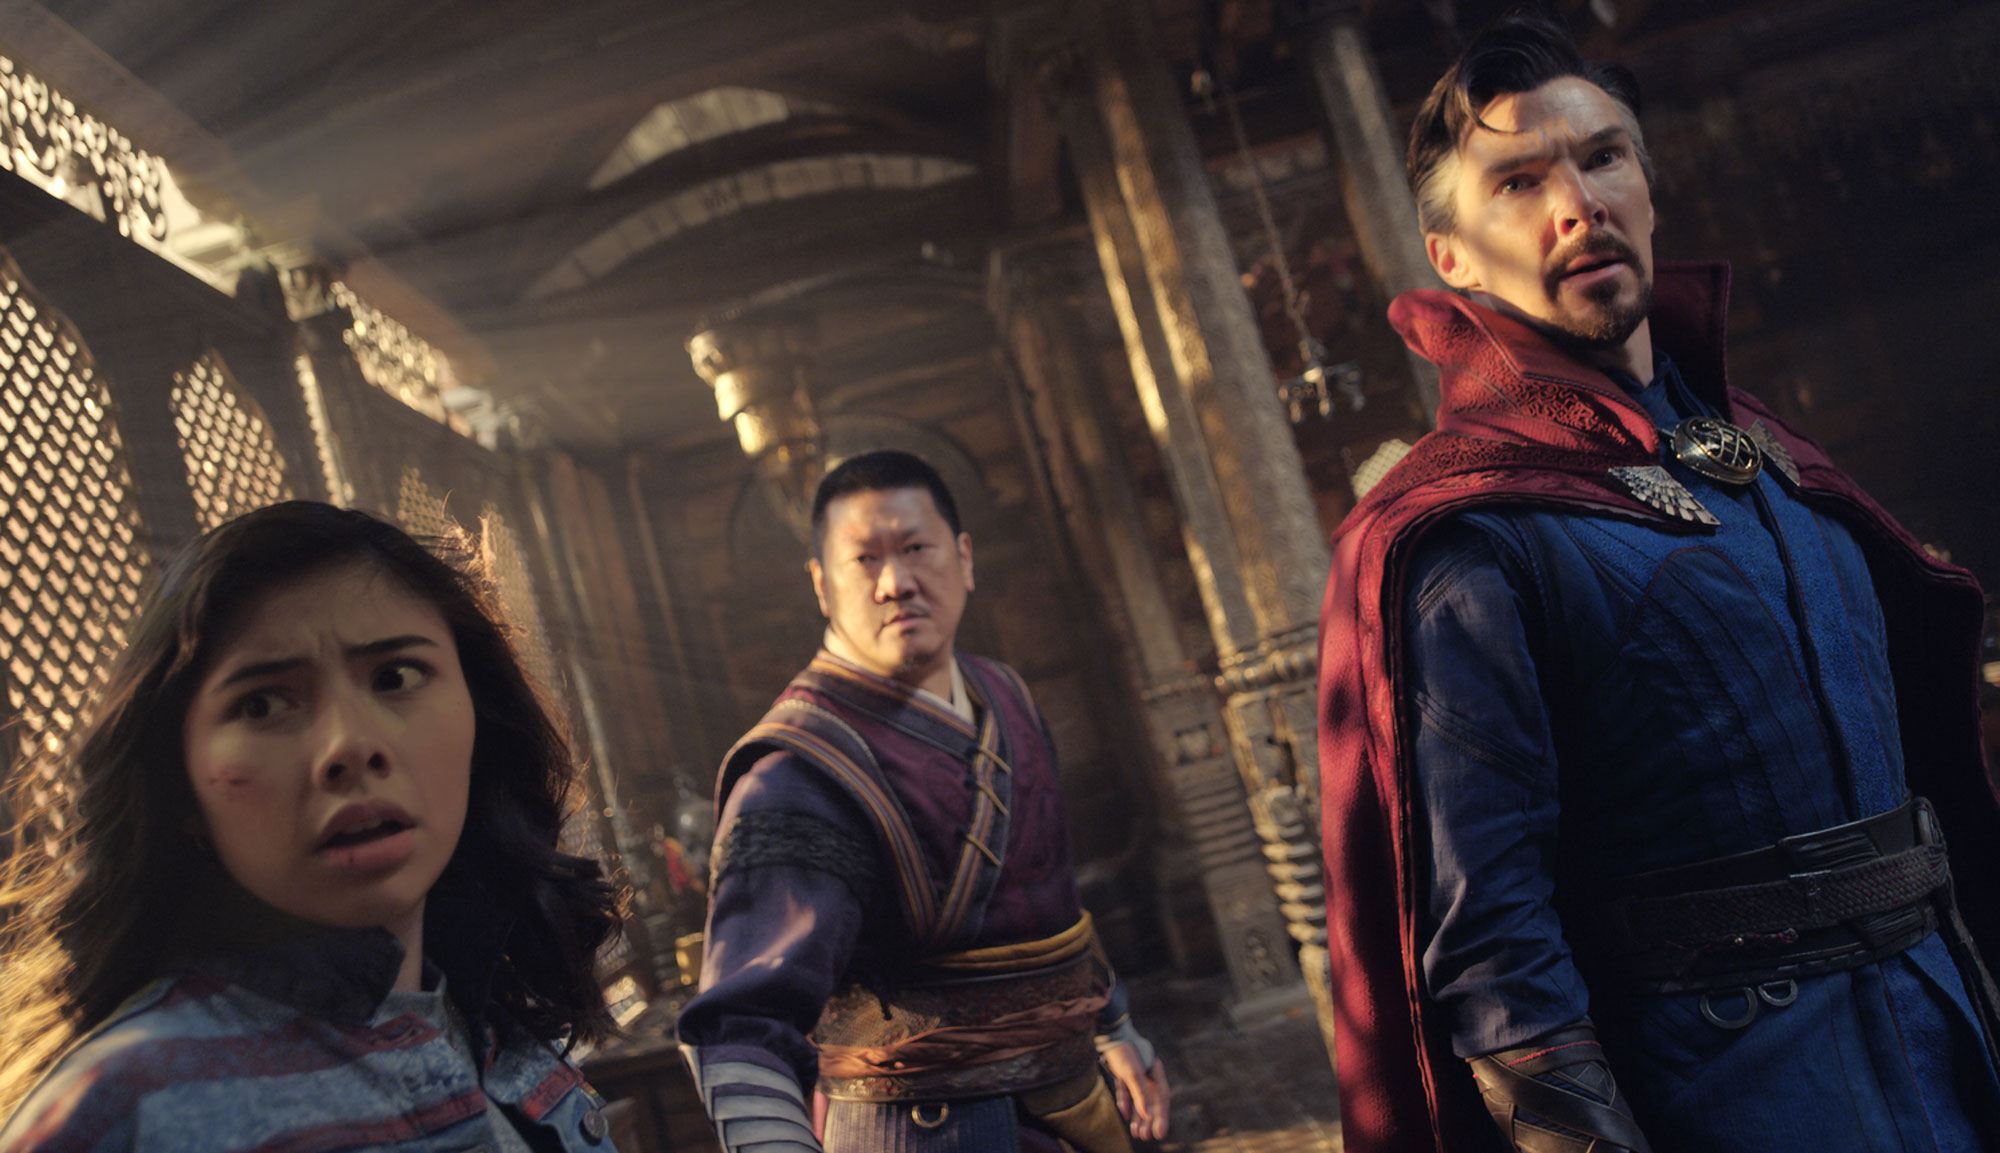 Benedict Cumberbatch, Benedict Wong and Xochitl Gomez in "Doctor Strange in the Multiverse of Madness"